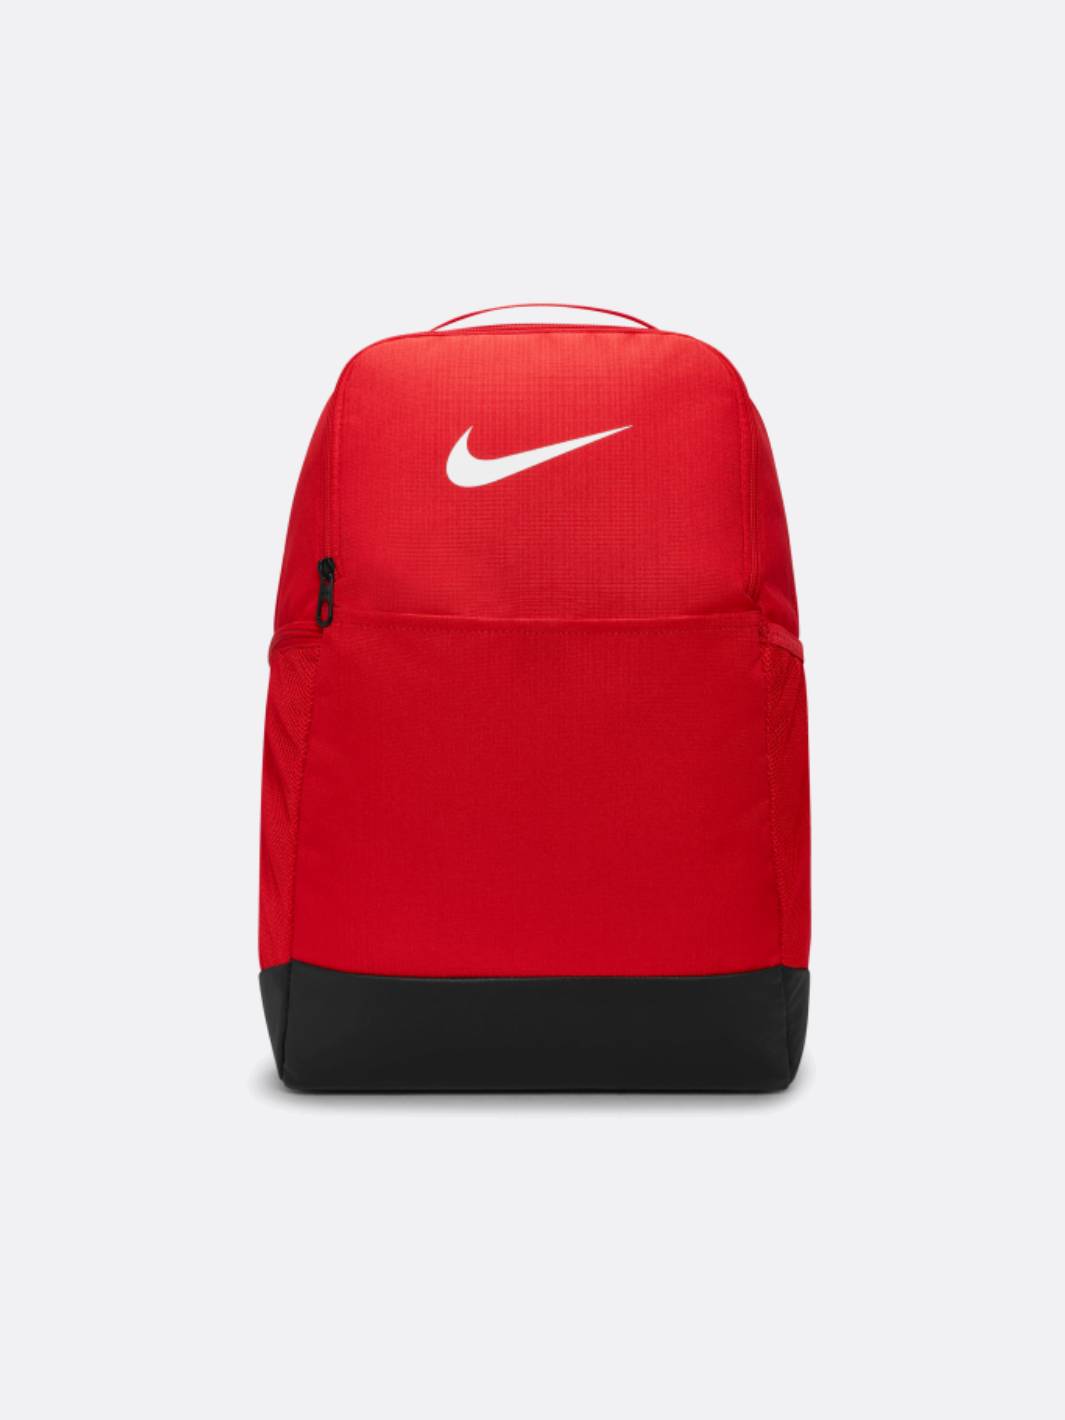 Nike - Accessories - Brasilia 9.5 Backpack - University Red/White – Nohble